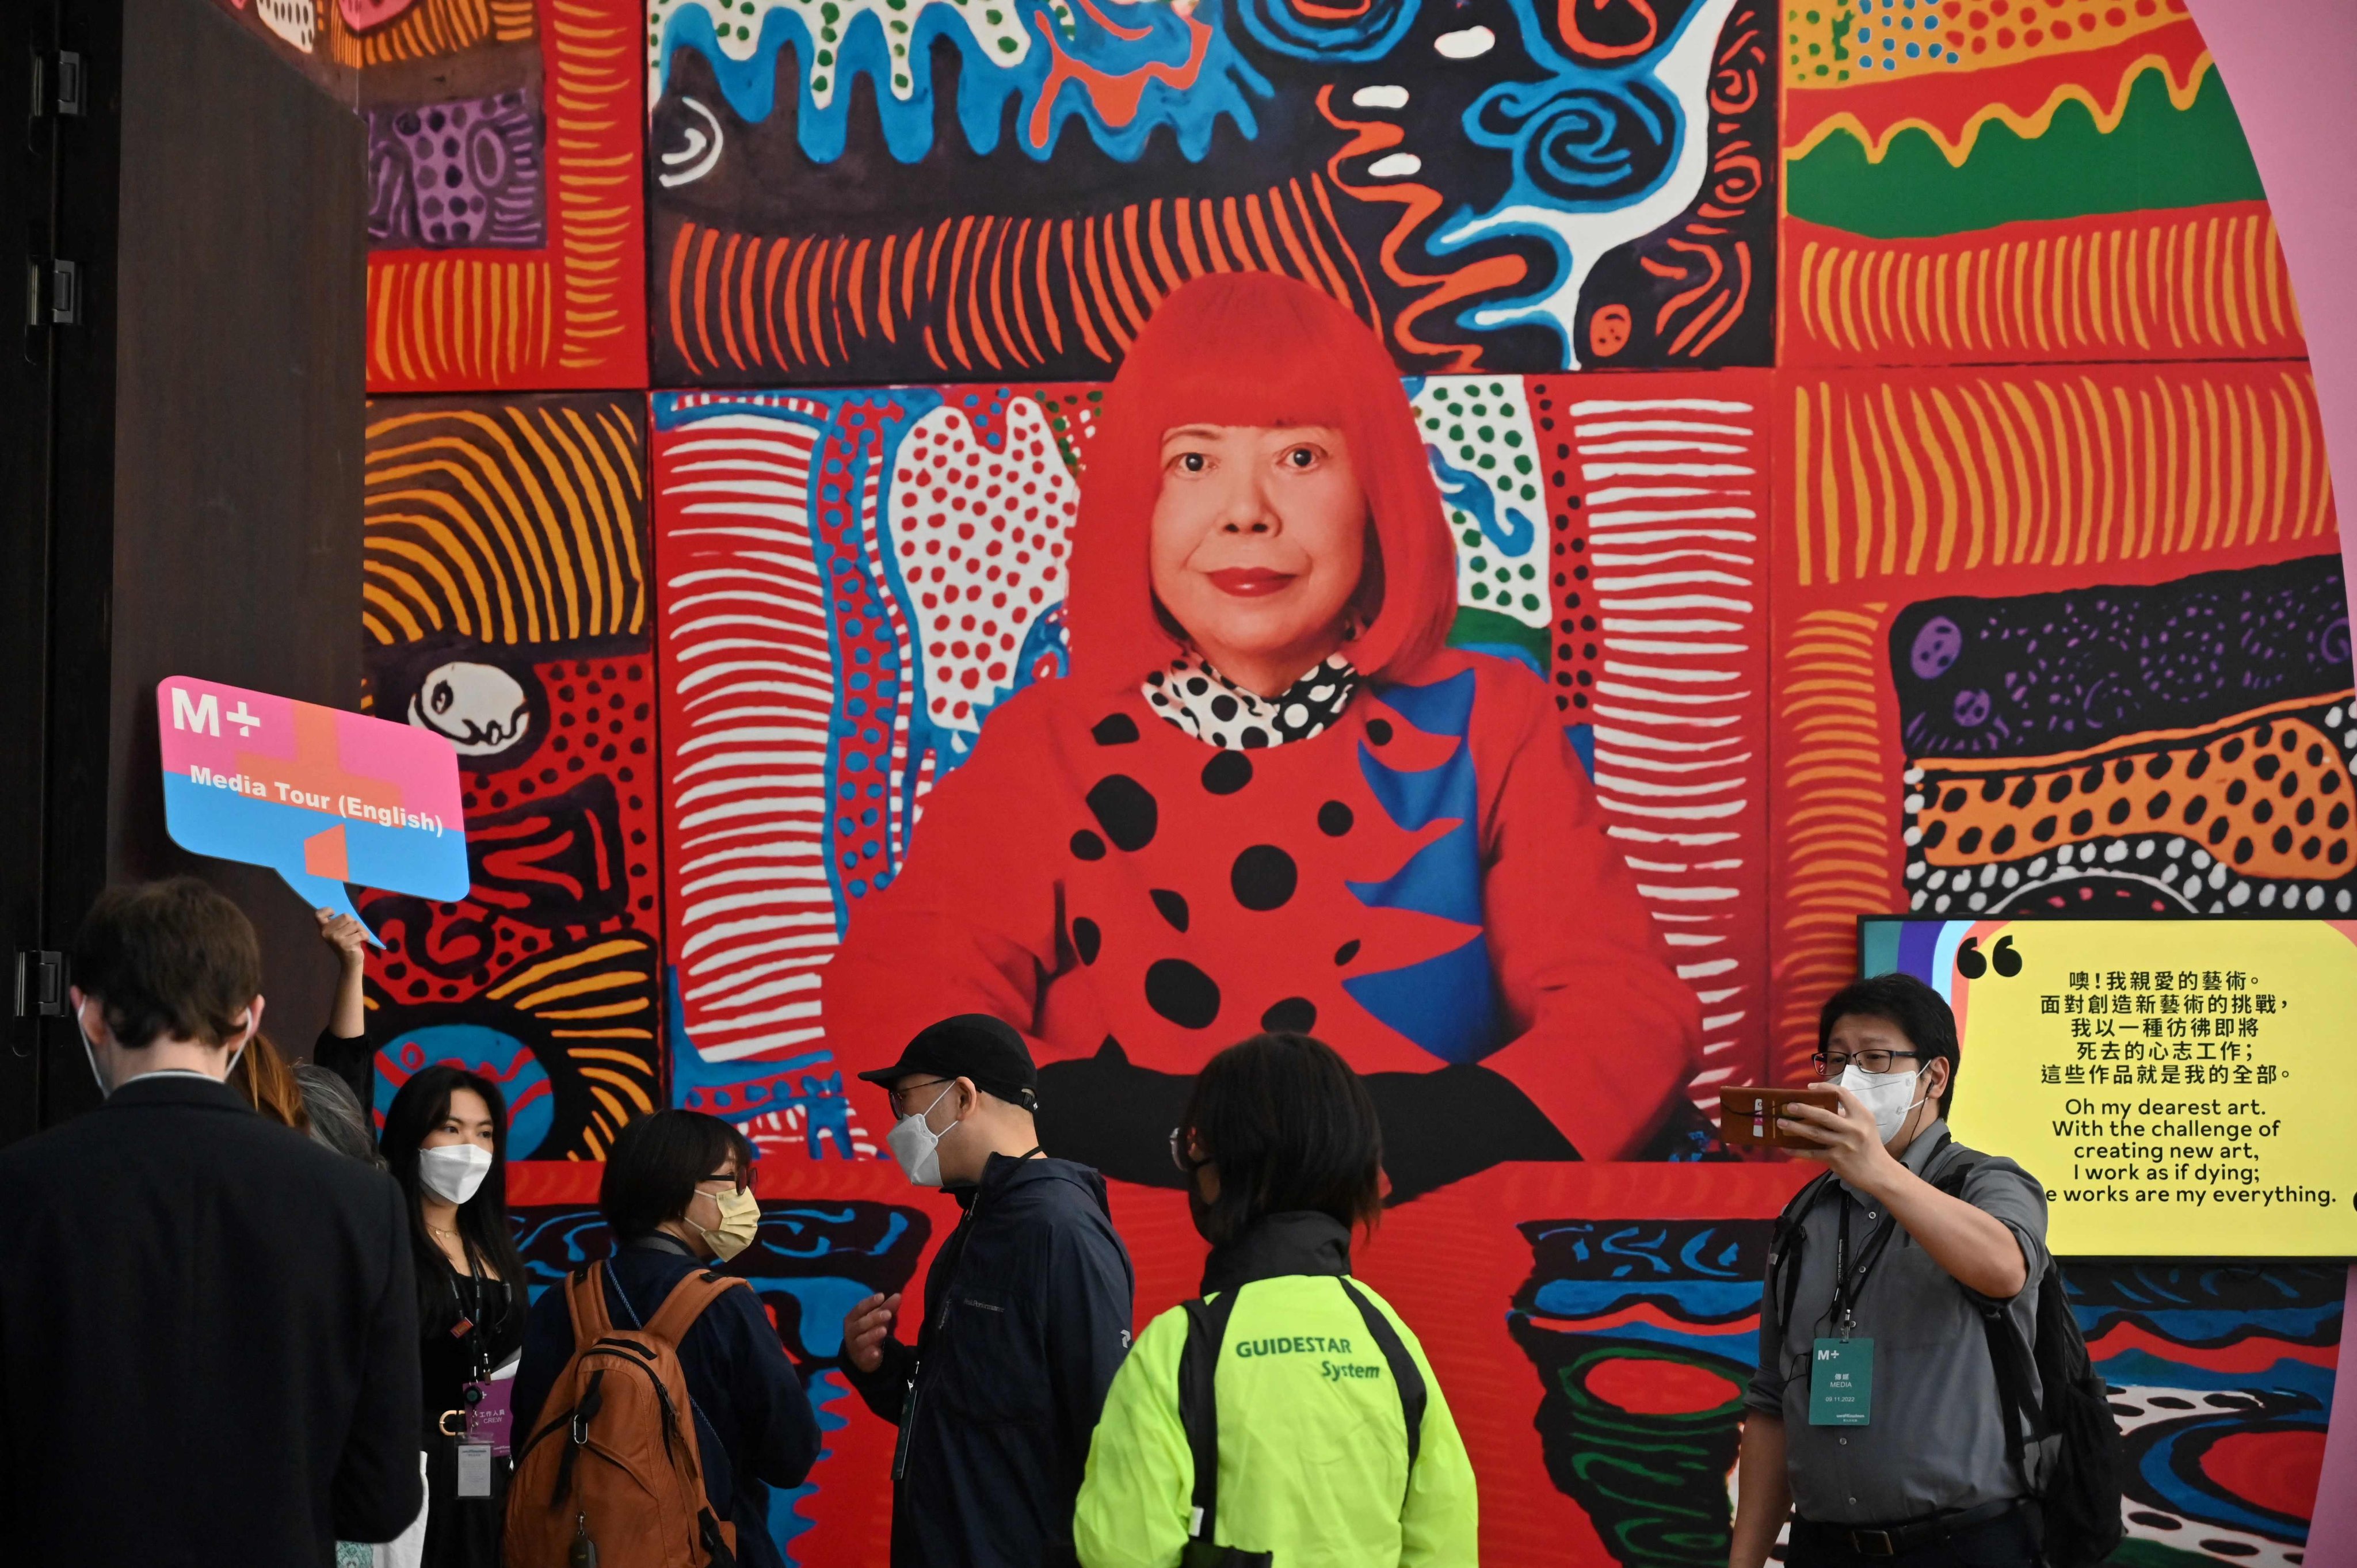 Members of the media attend a press preview tour of the Yayoi Kusama exhibition at M+ art museum in Hong Kong. Photo: AFP